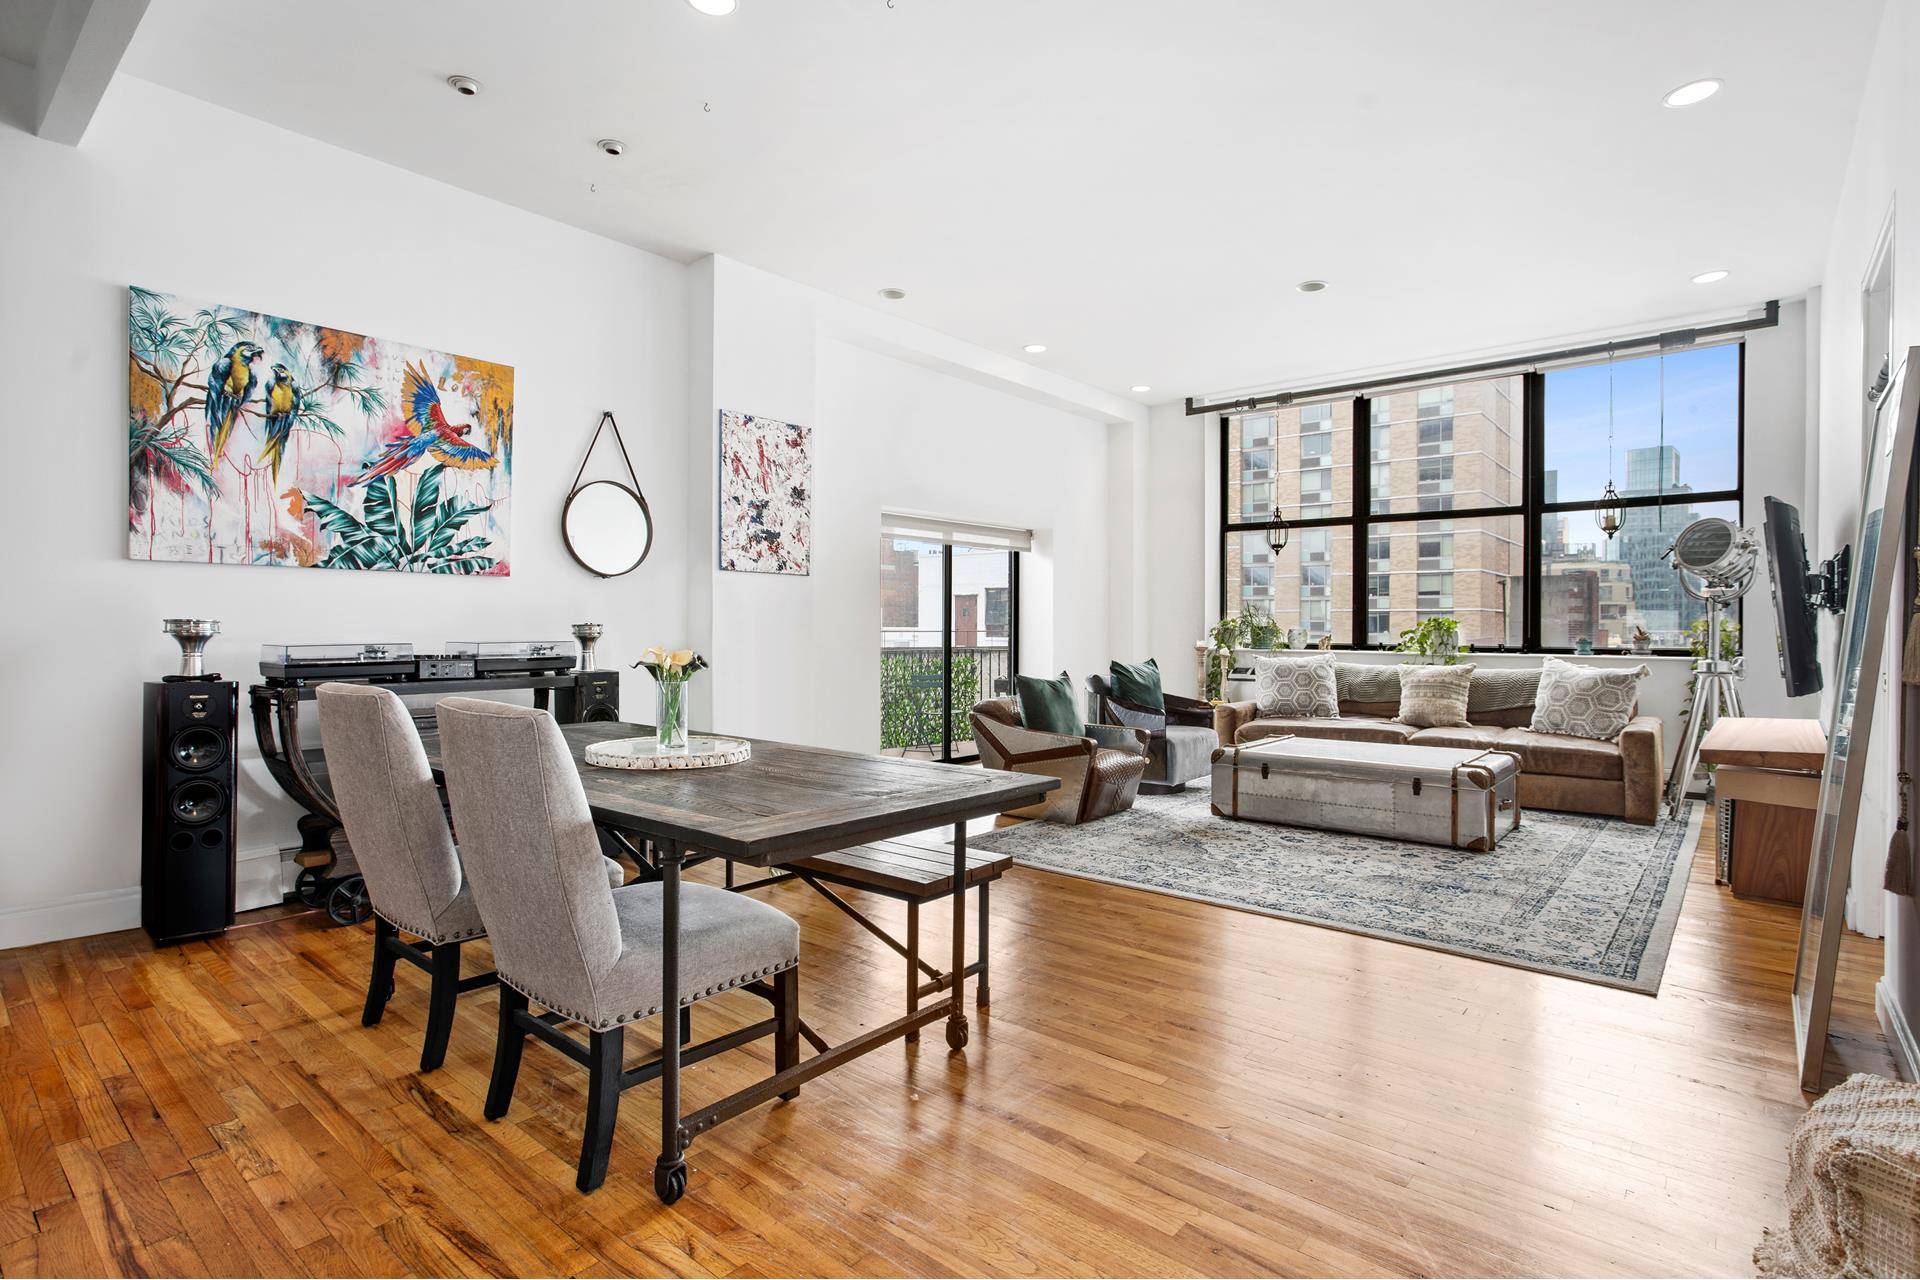 Welcome to unit 6A at 114 E 13th St, the American Felt Building a representation of modern Manhattan living.